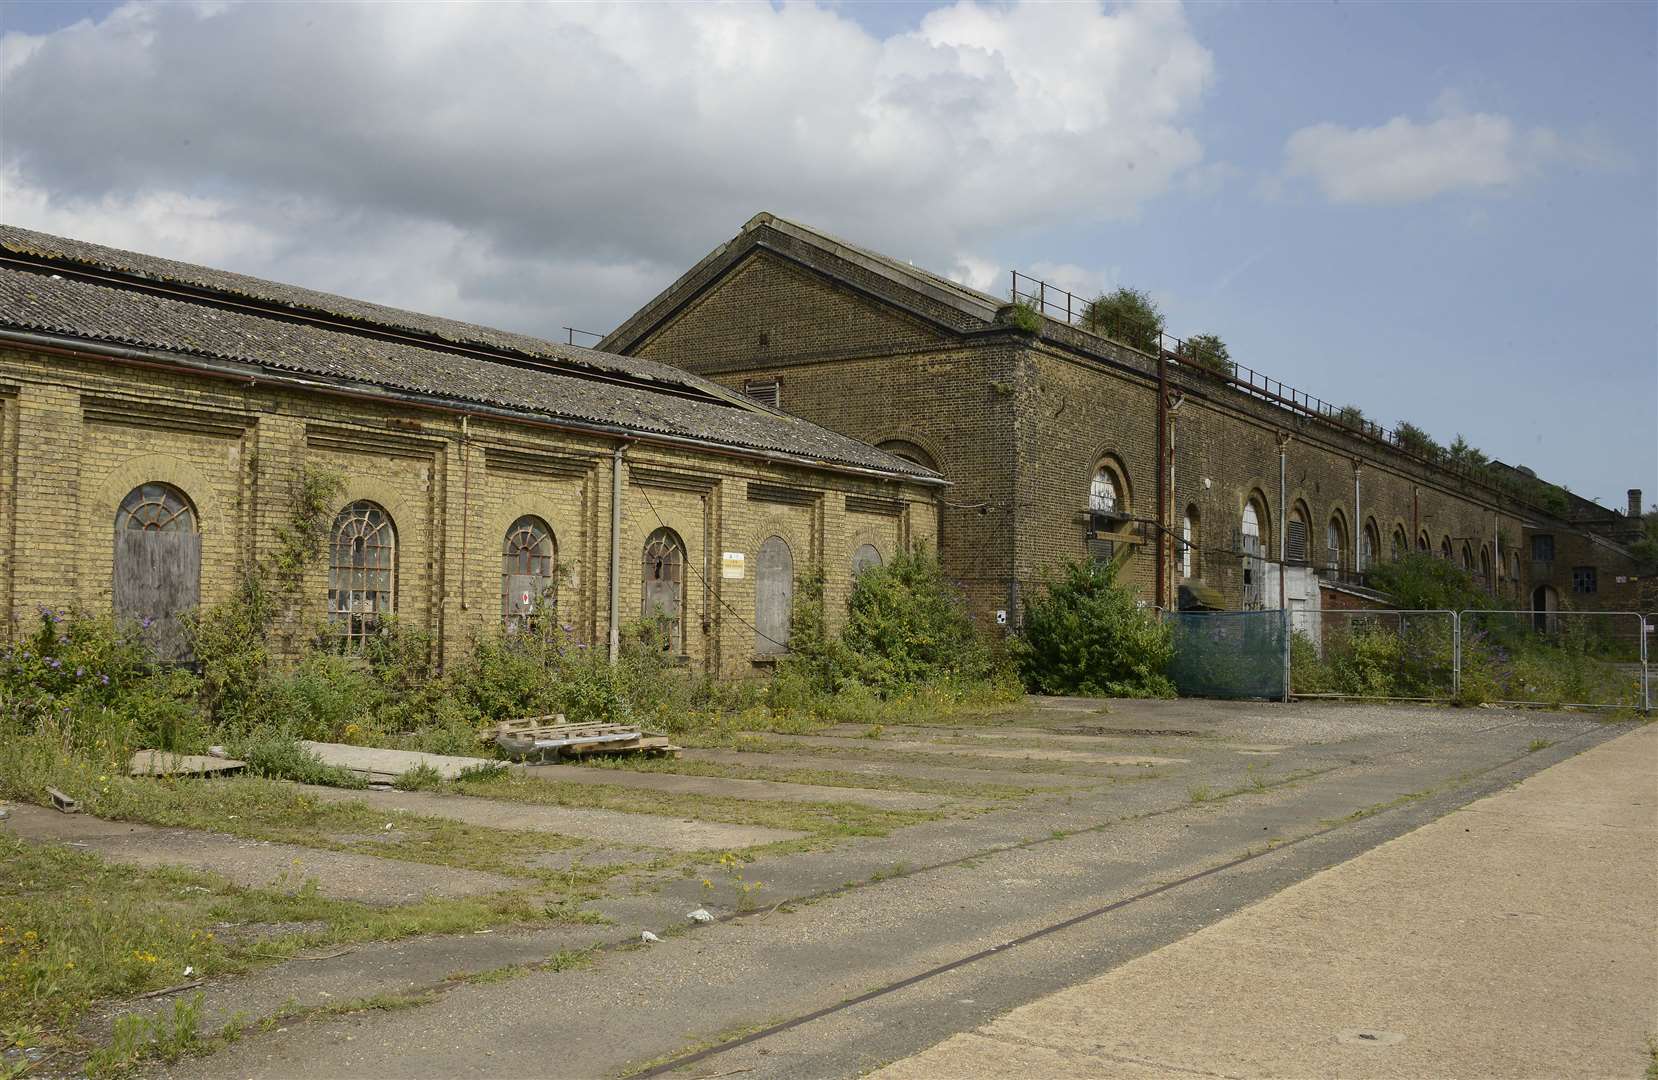 The former railway works site will be transformed